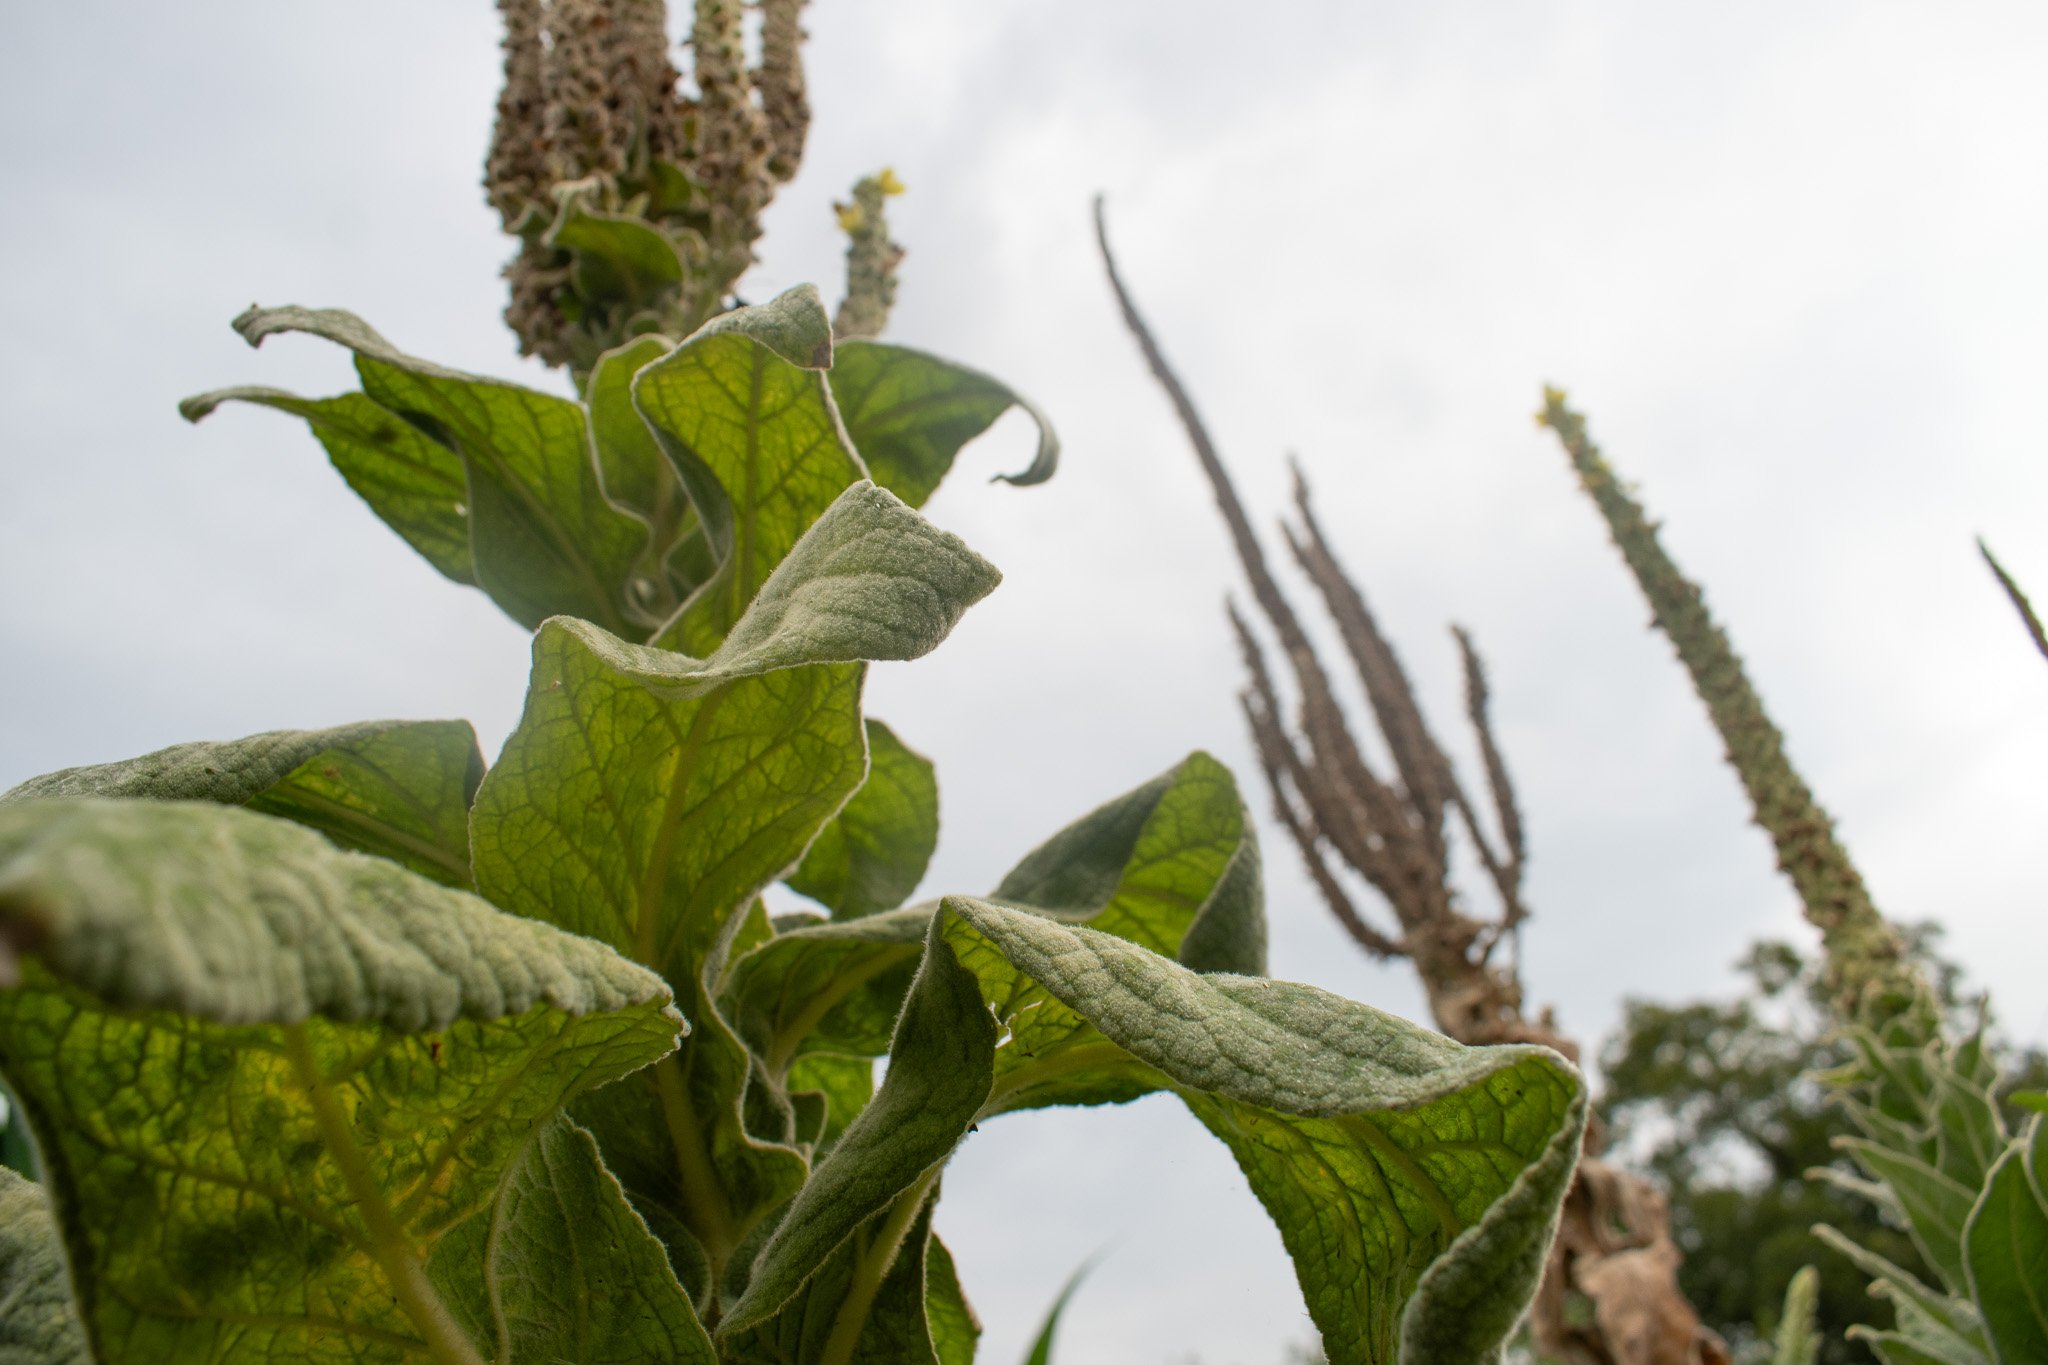   Mullein, known colloquially as “cowboy’s toilet paper,” grows wildly in the garden Sept. 13. The herb is not only good for treating respiratory illnesses or a quick fix for toilet paper; it also works to rehabilitate the soil where it takes root.  